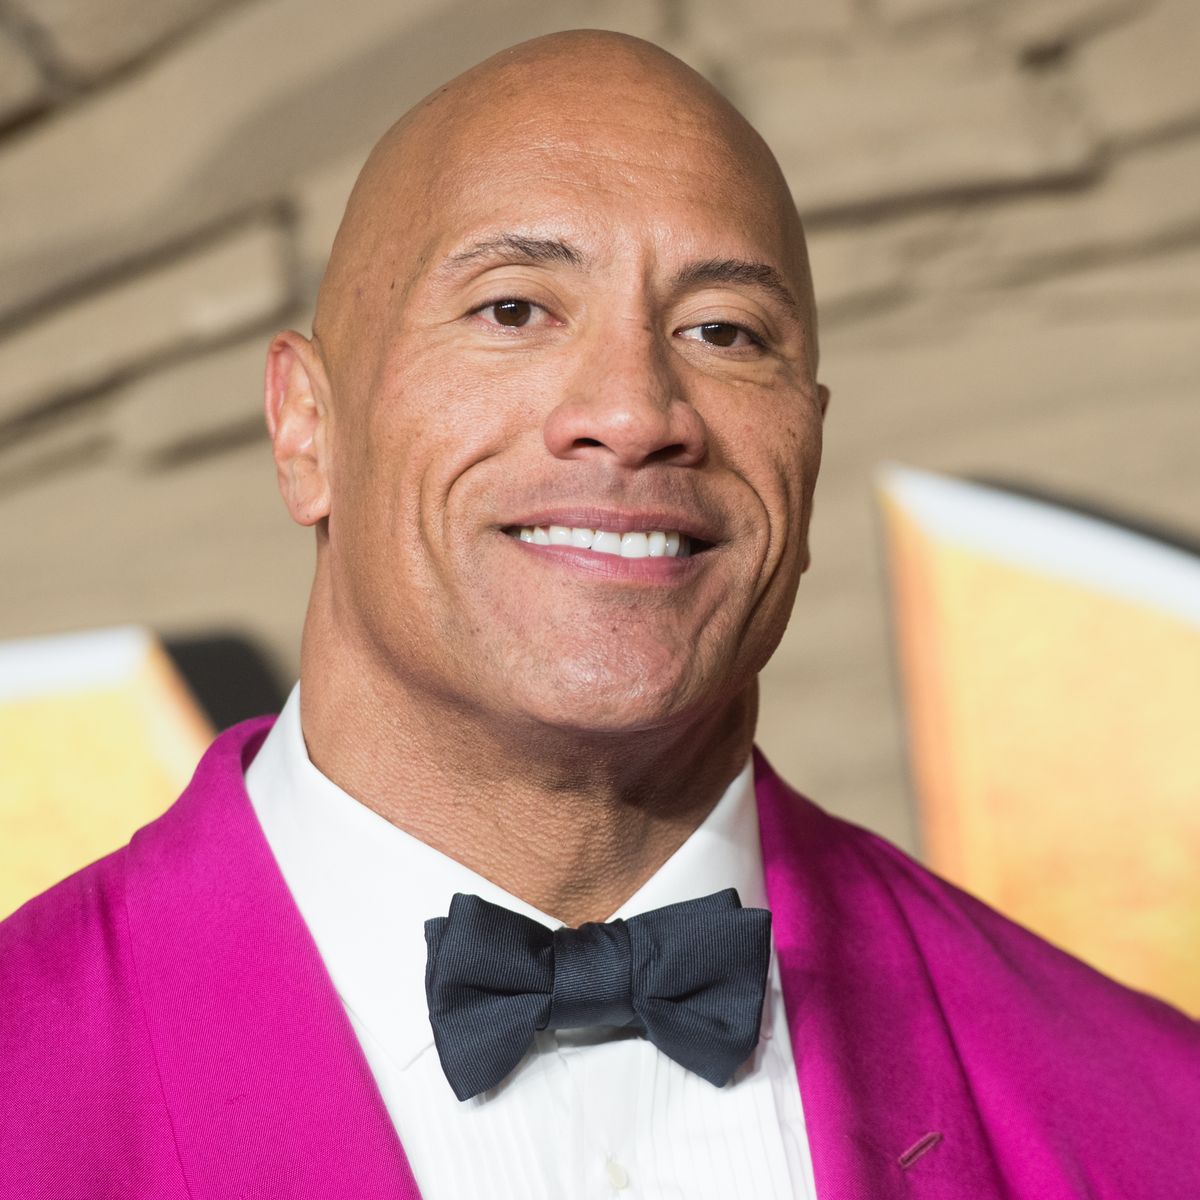 Dwayne Johnson Denies Being Booed For Not Helping Wildfire Victims